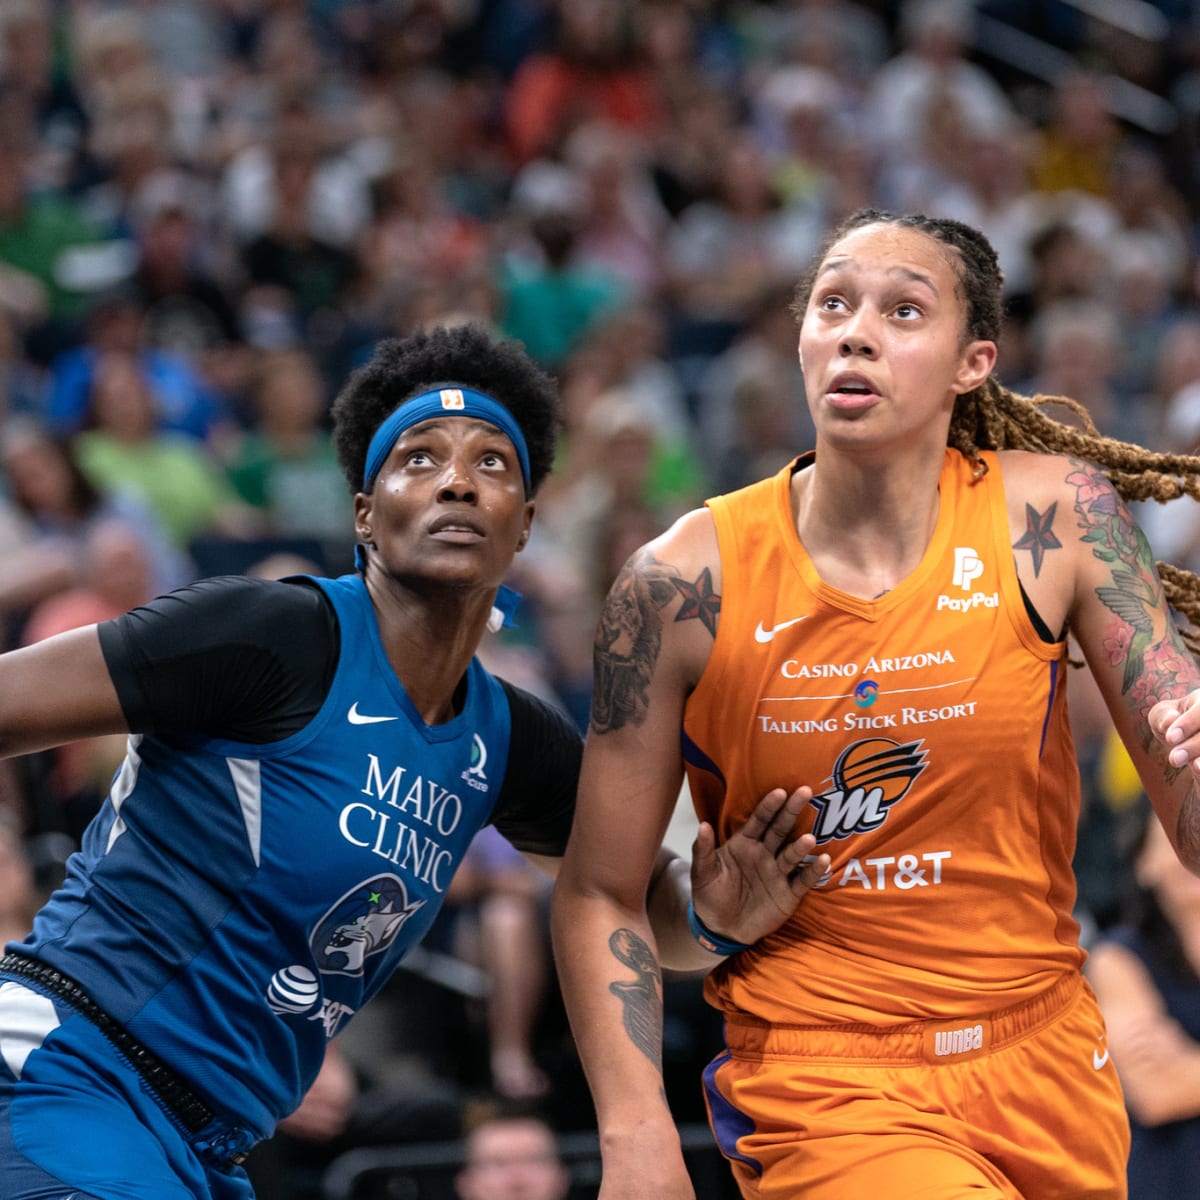 Lynx Schedule 2022 Wnba Releases 2022 Schedule; Minnesota Lynx Open May 6 - Bring Me The News